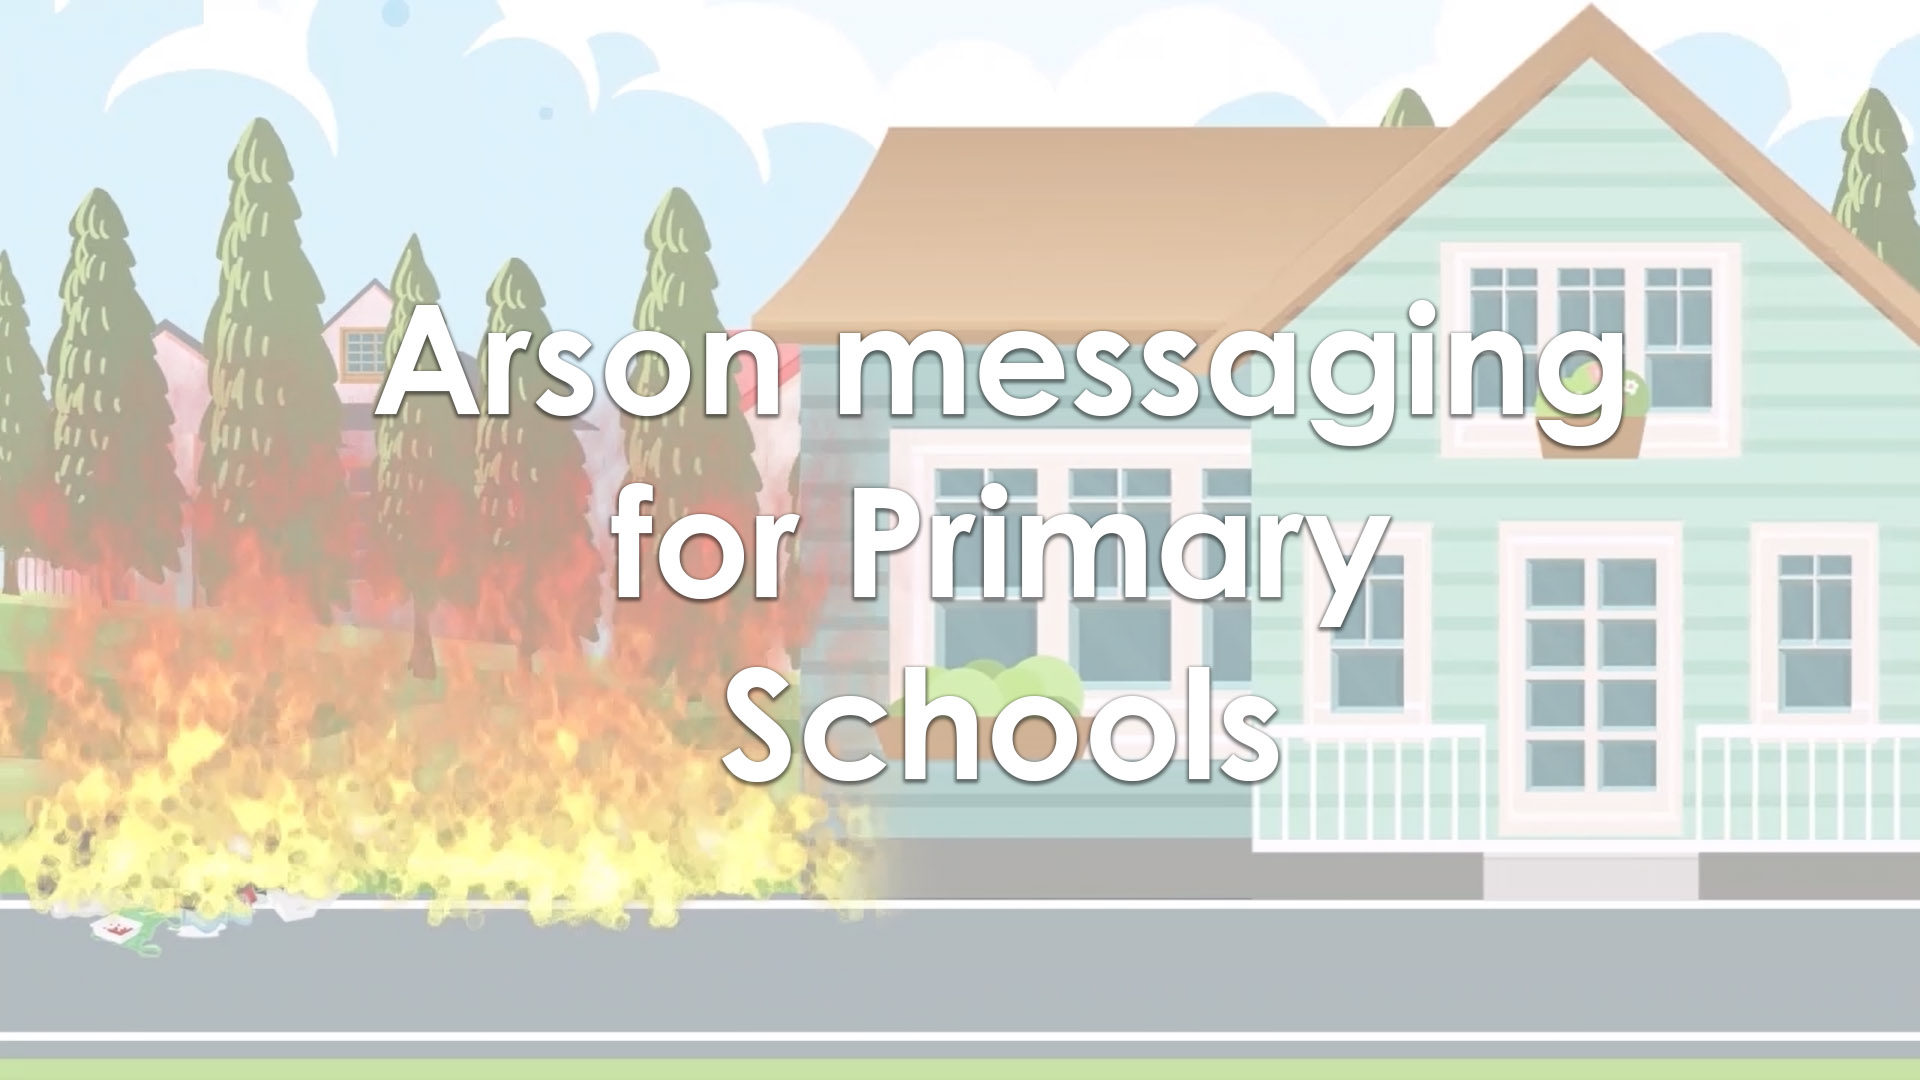 arson messaging for primary schools